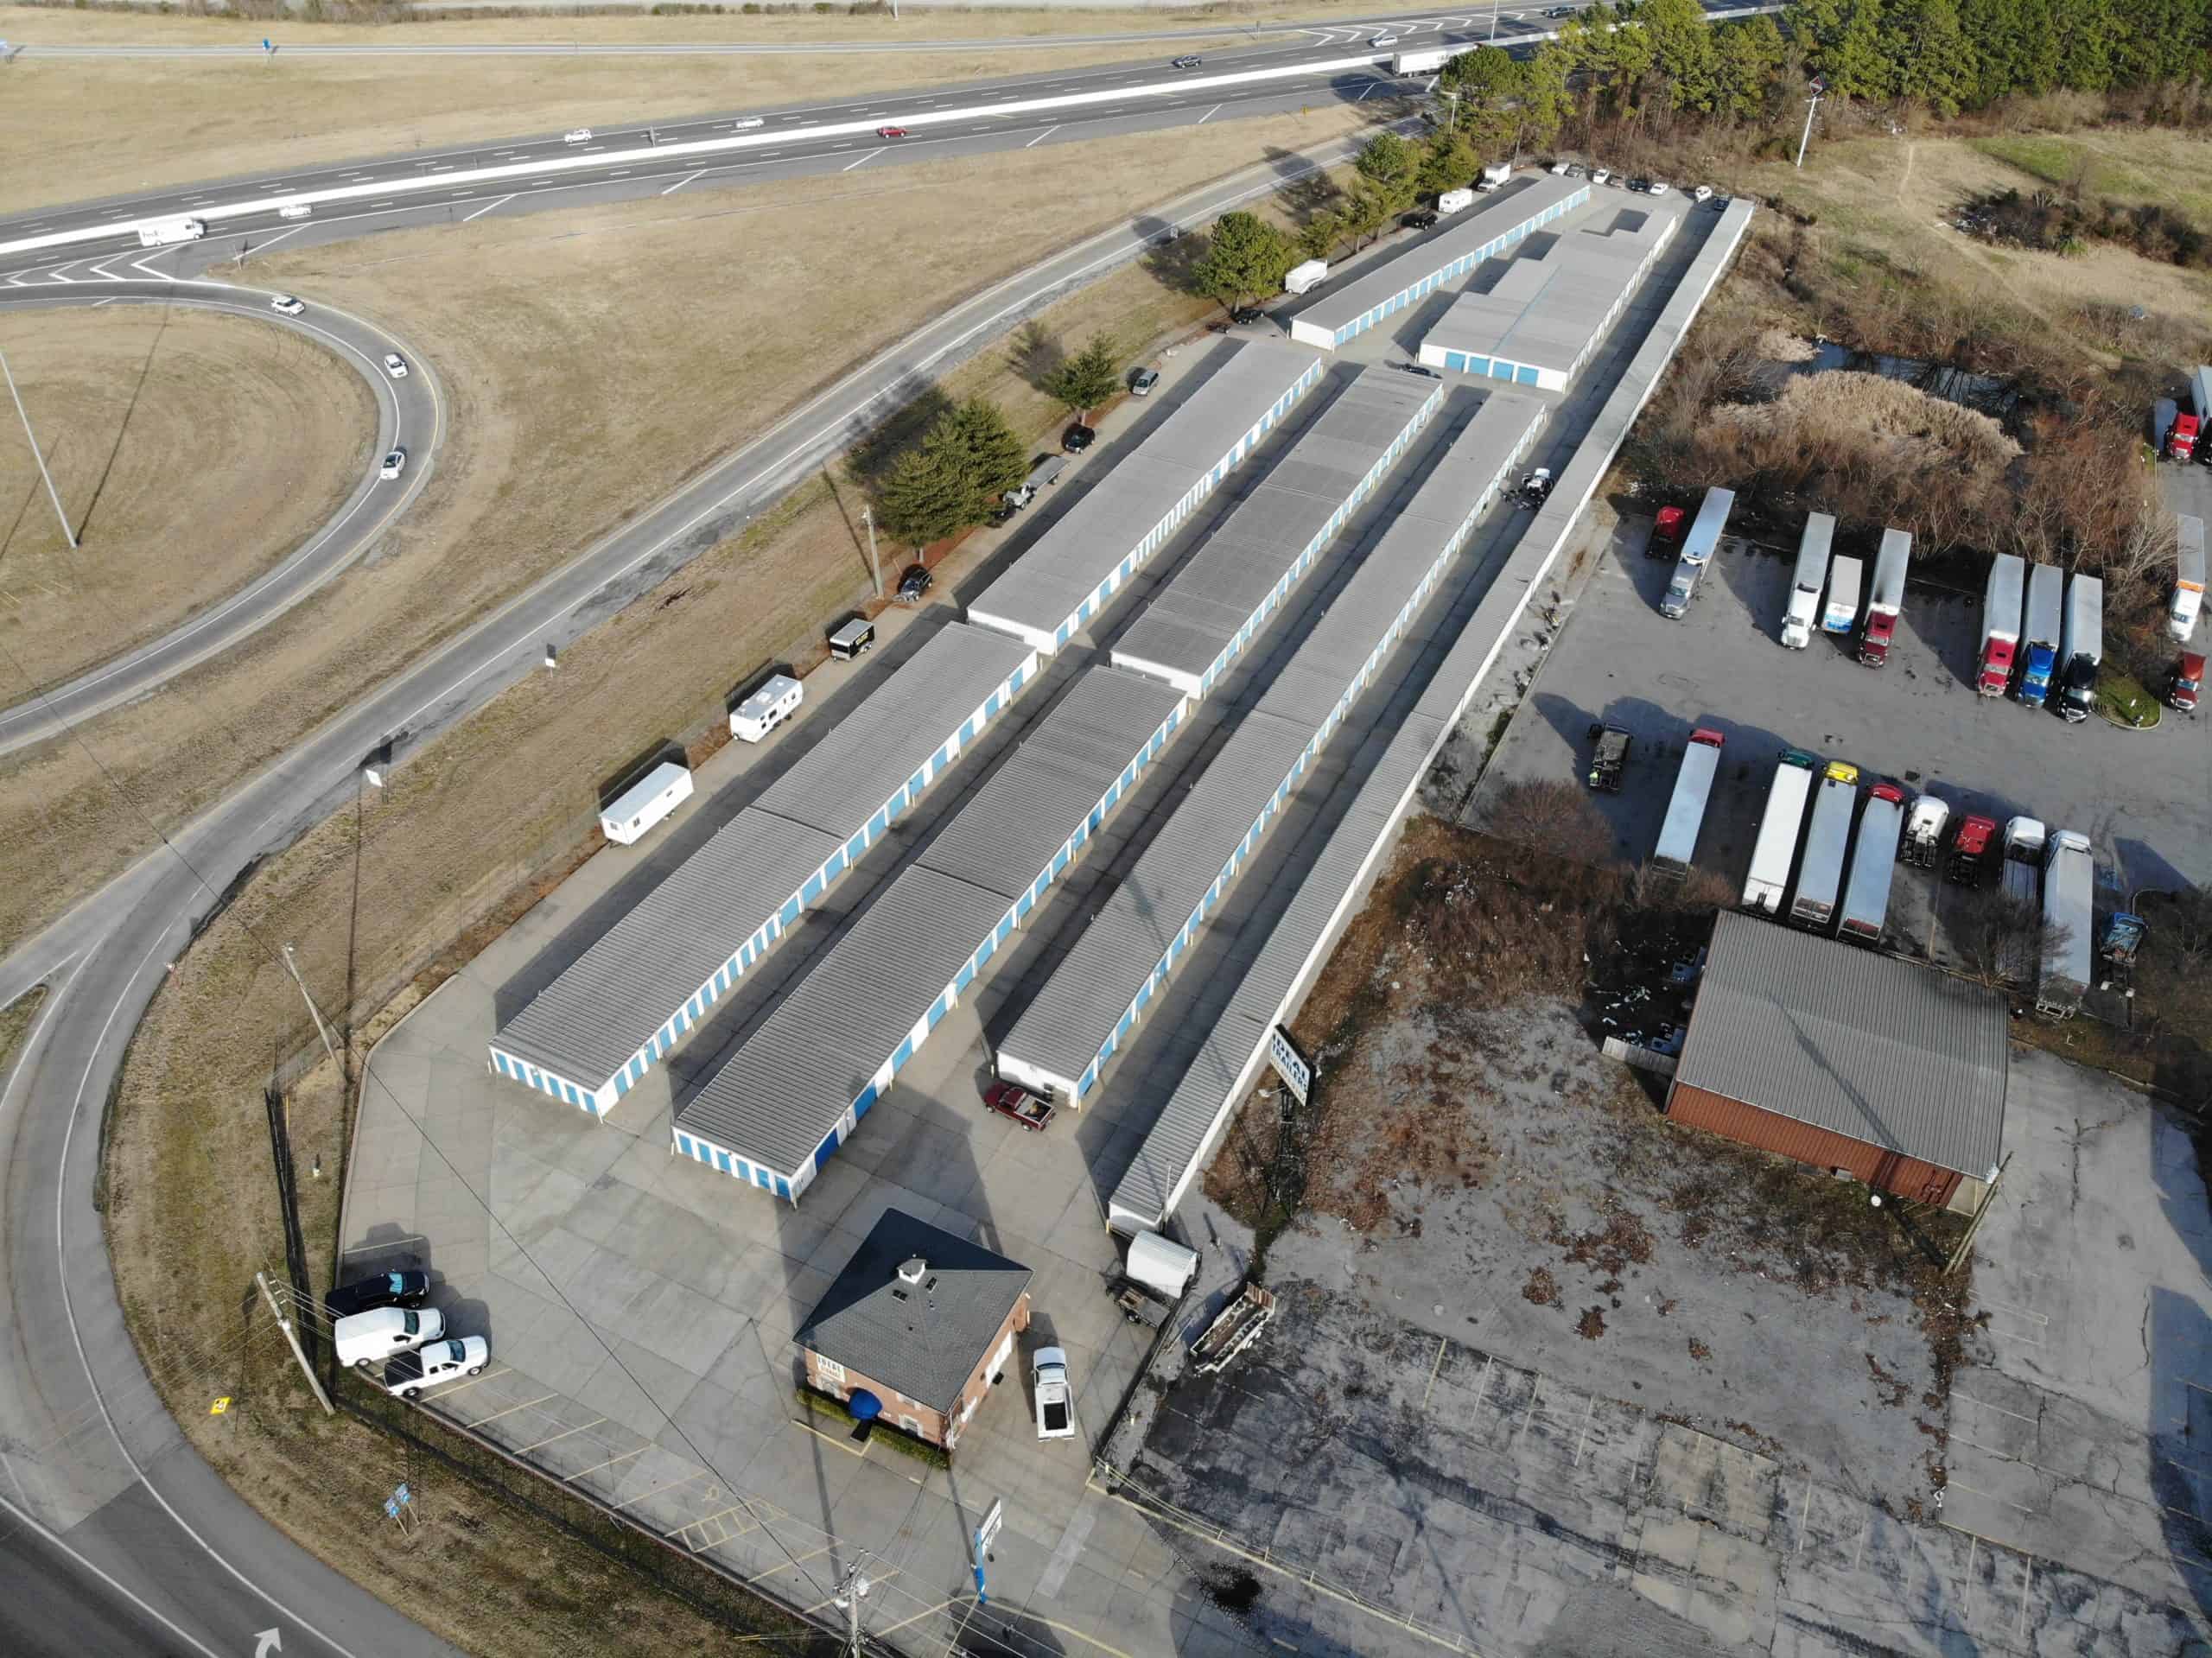 Sold! Wedgewood sells TN storage operation for $17.3M